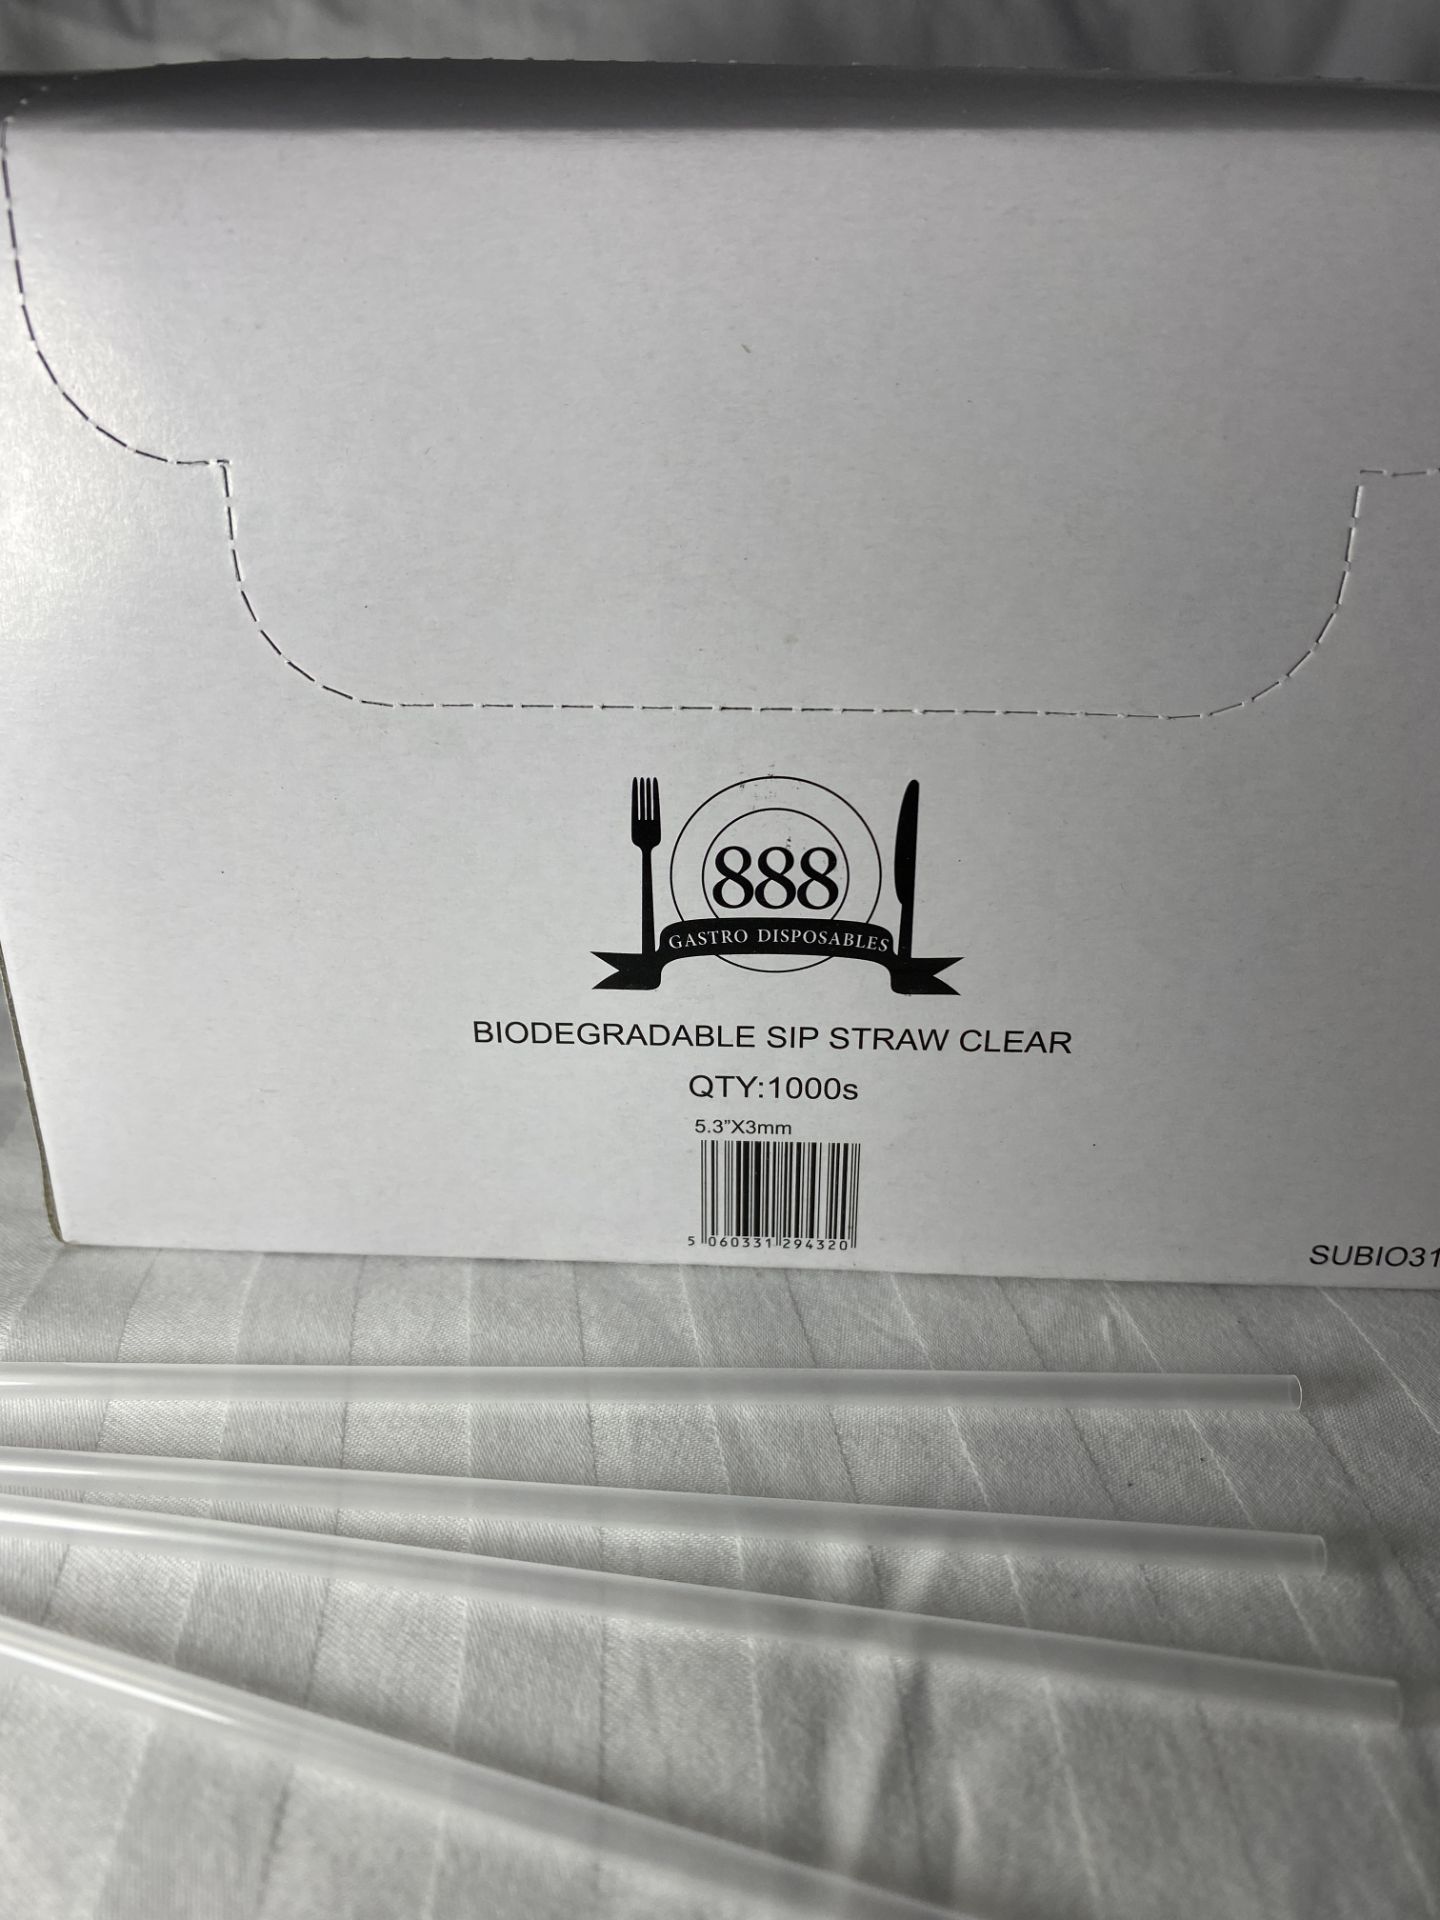 2 x Boxes of Biodegradeable Sip Straws by 888 Gastro Disposables | DSP57 - Image 3 of 3